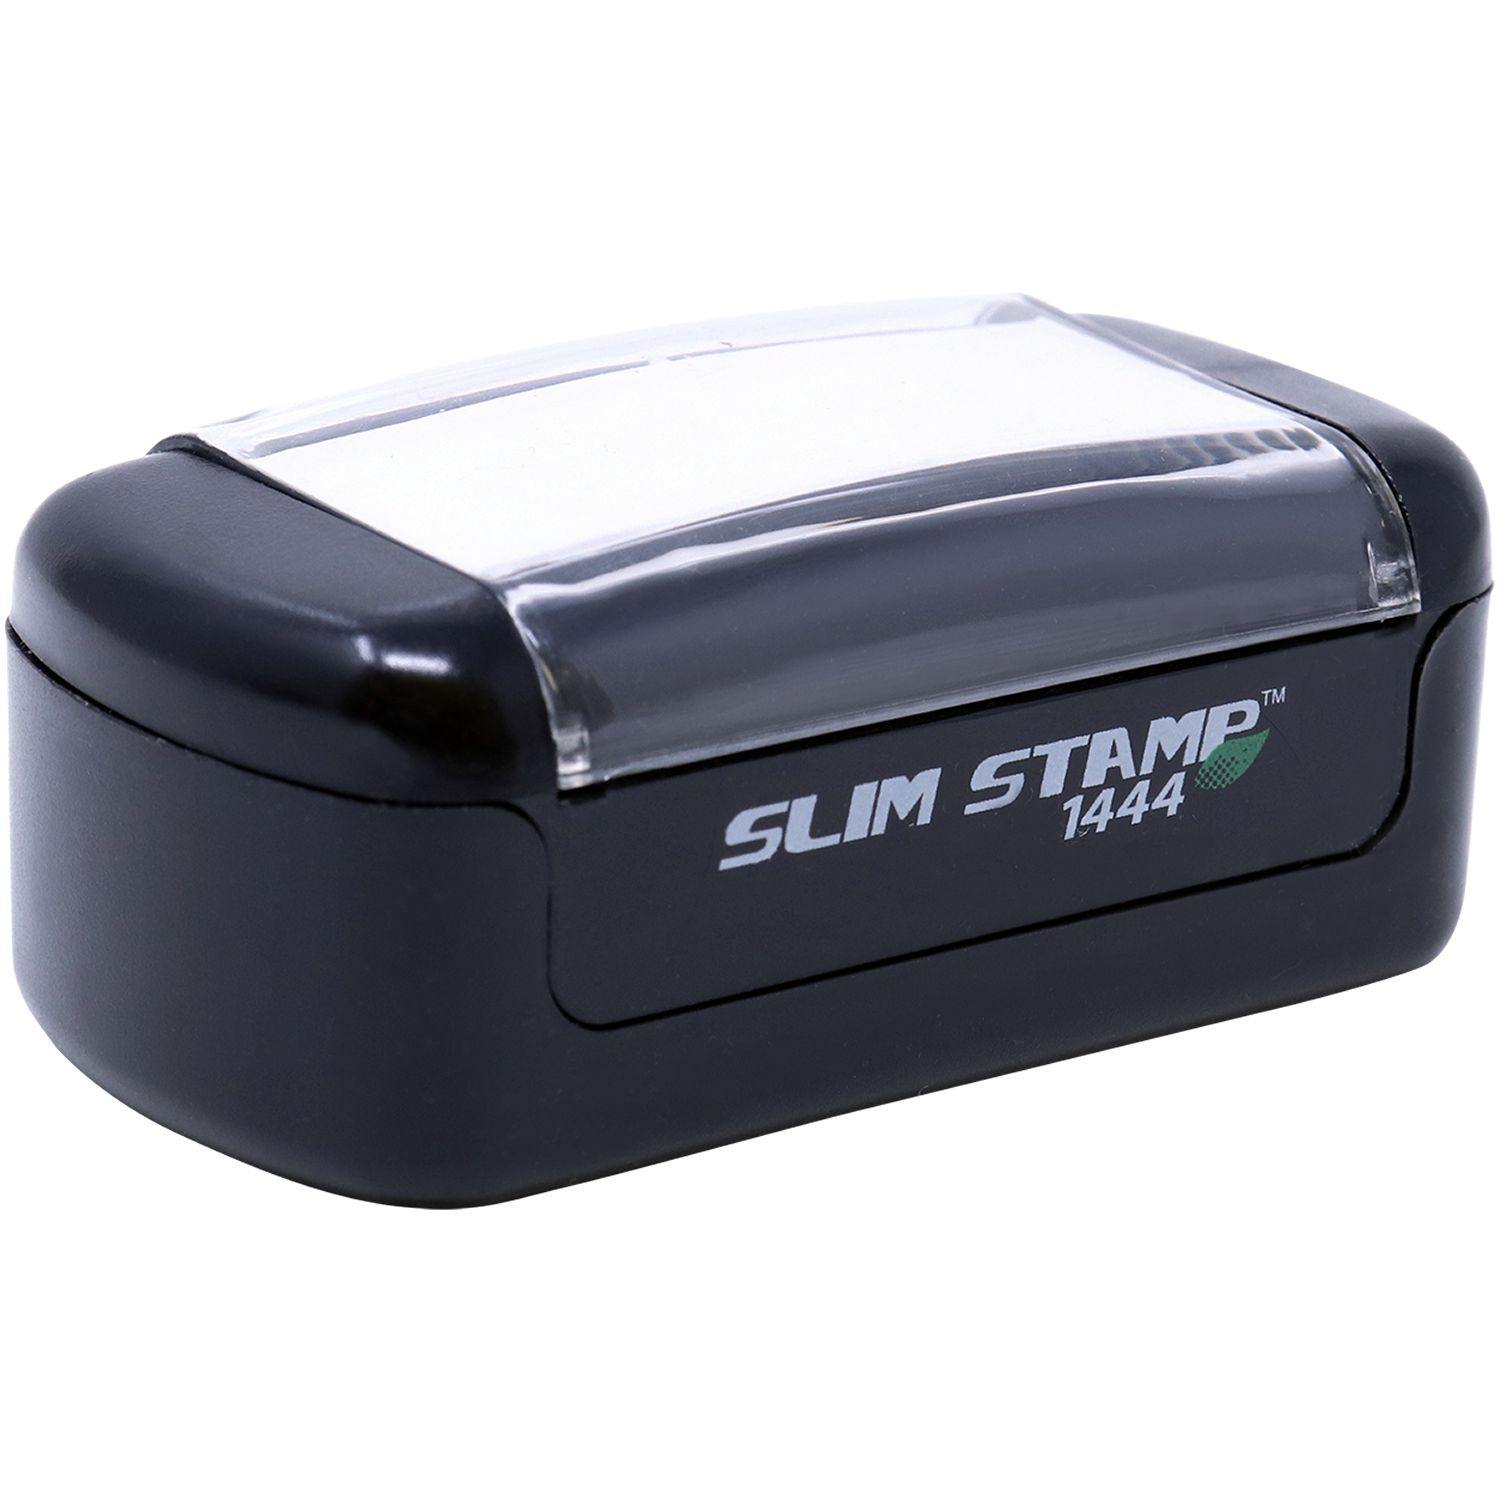 Alt View of Slim Pre-Inked First Class Mail International Stamp Mount Angle